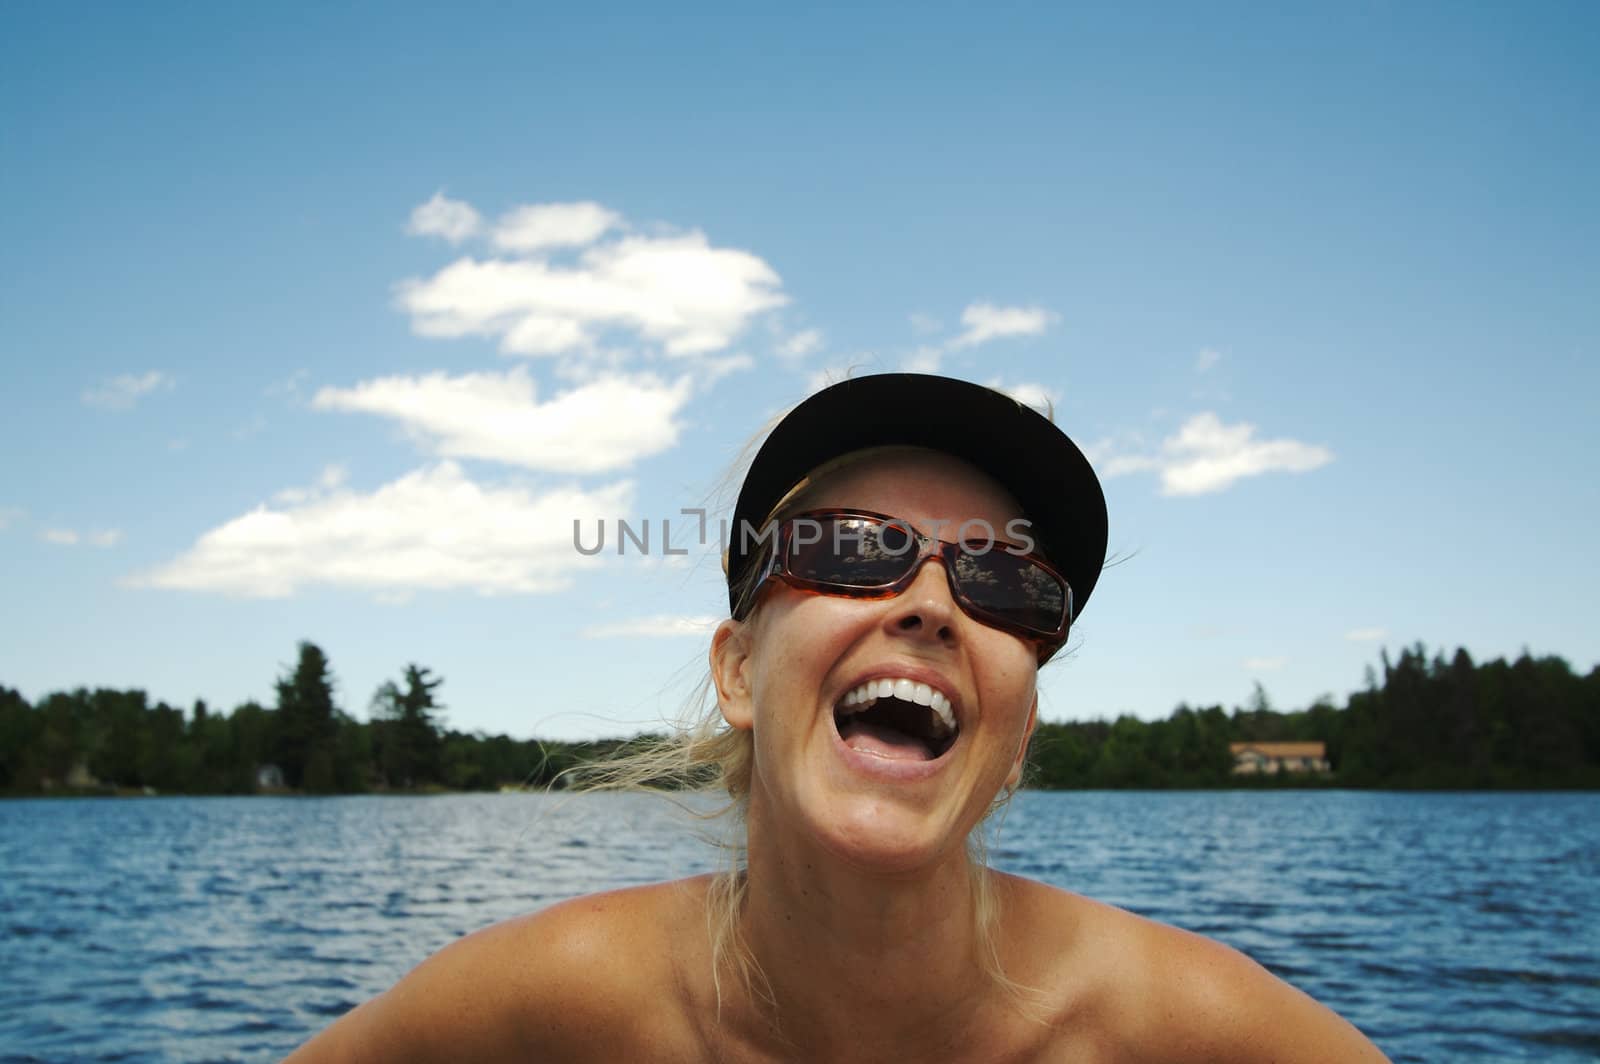 Beautiful woman enjoys a summer day on the lake.